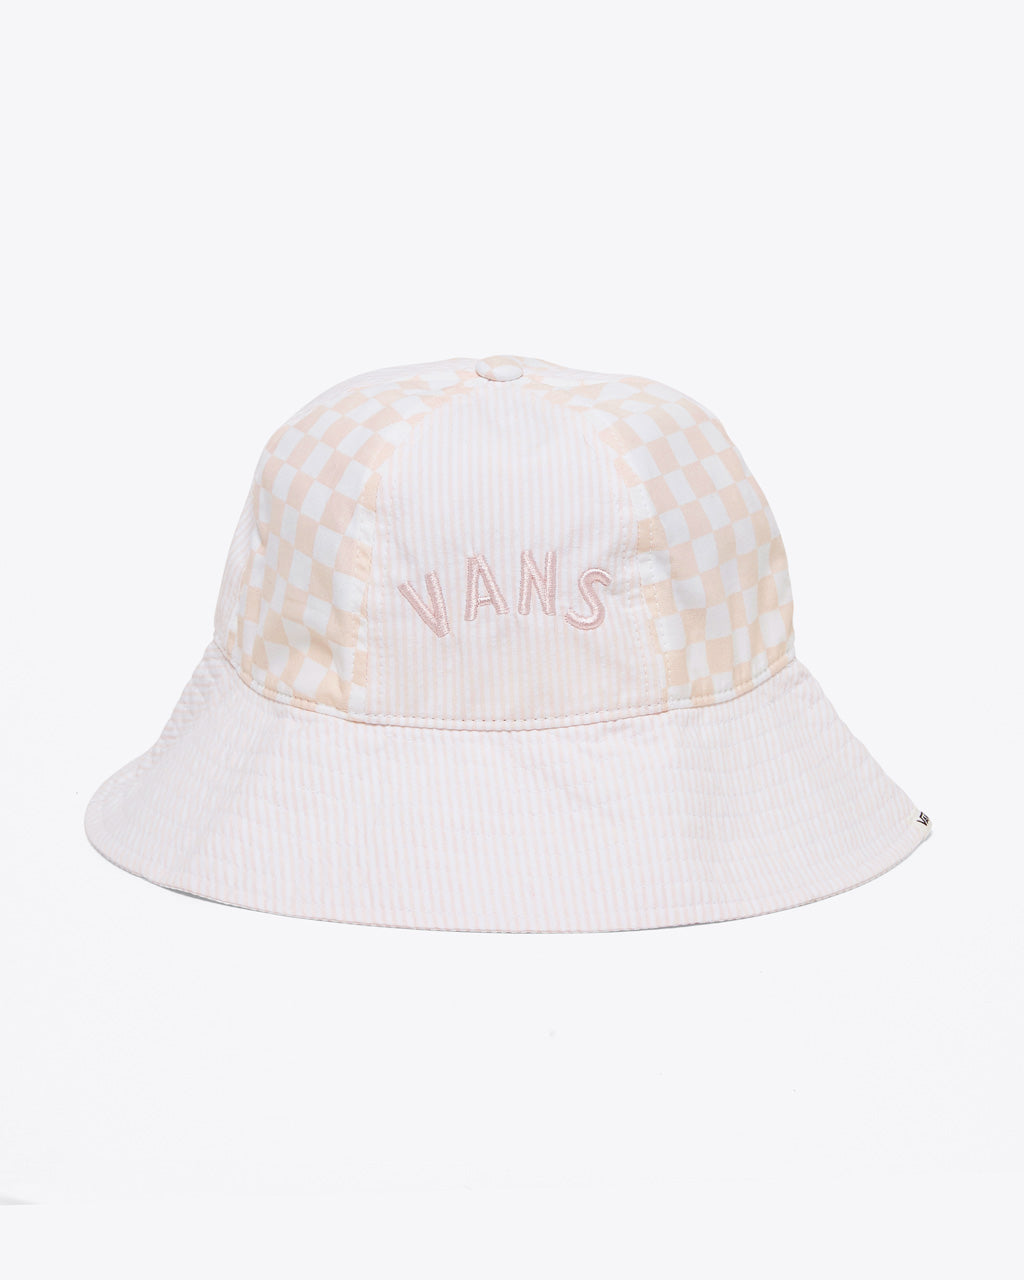 Tempel rådgive Menstruation How To Duffy Bucket Hat - Silver Peony by Vans - hat - ban.do